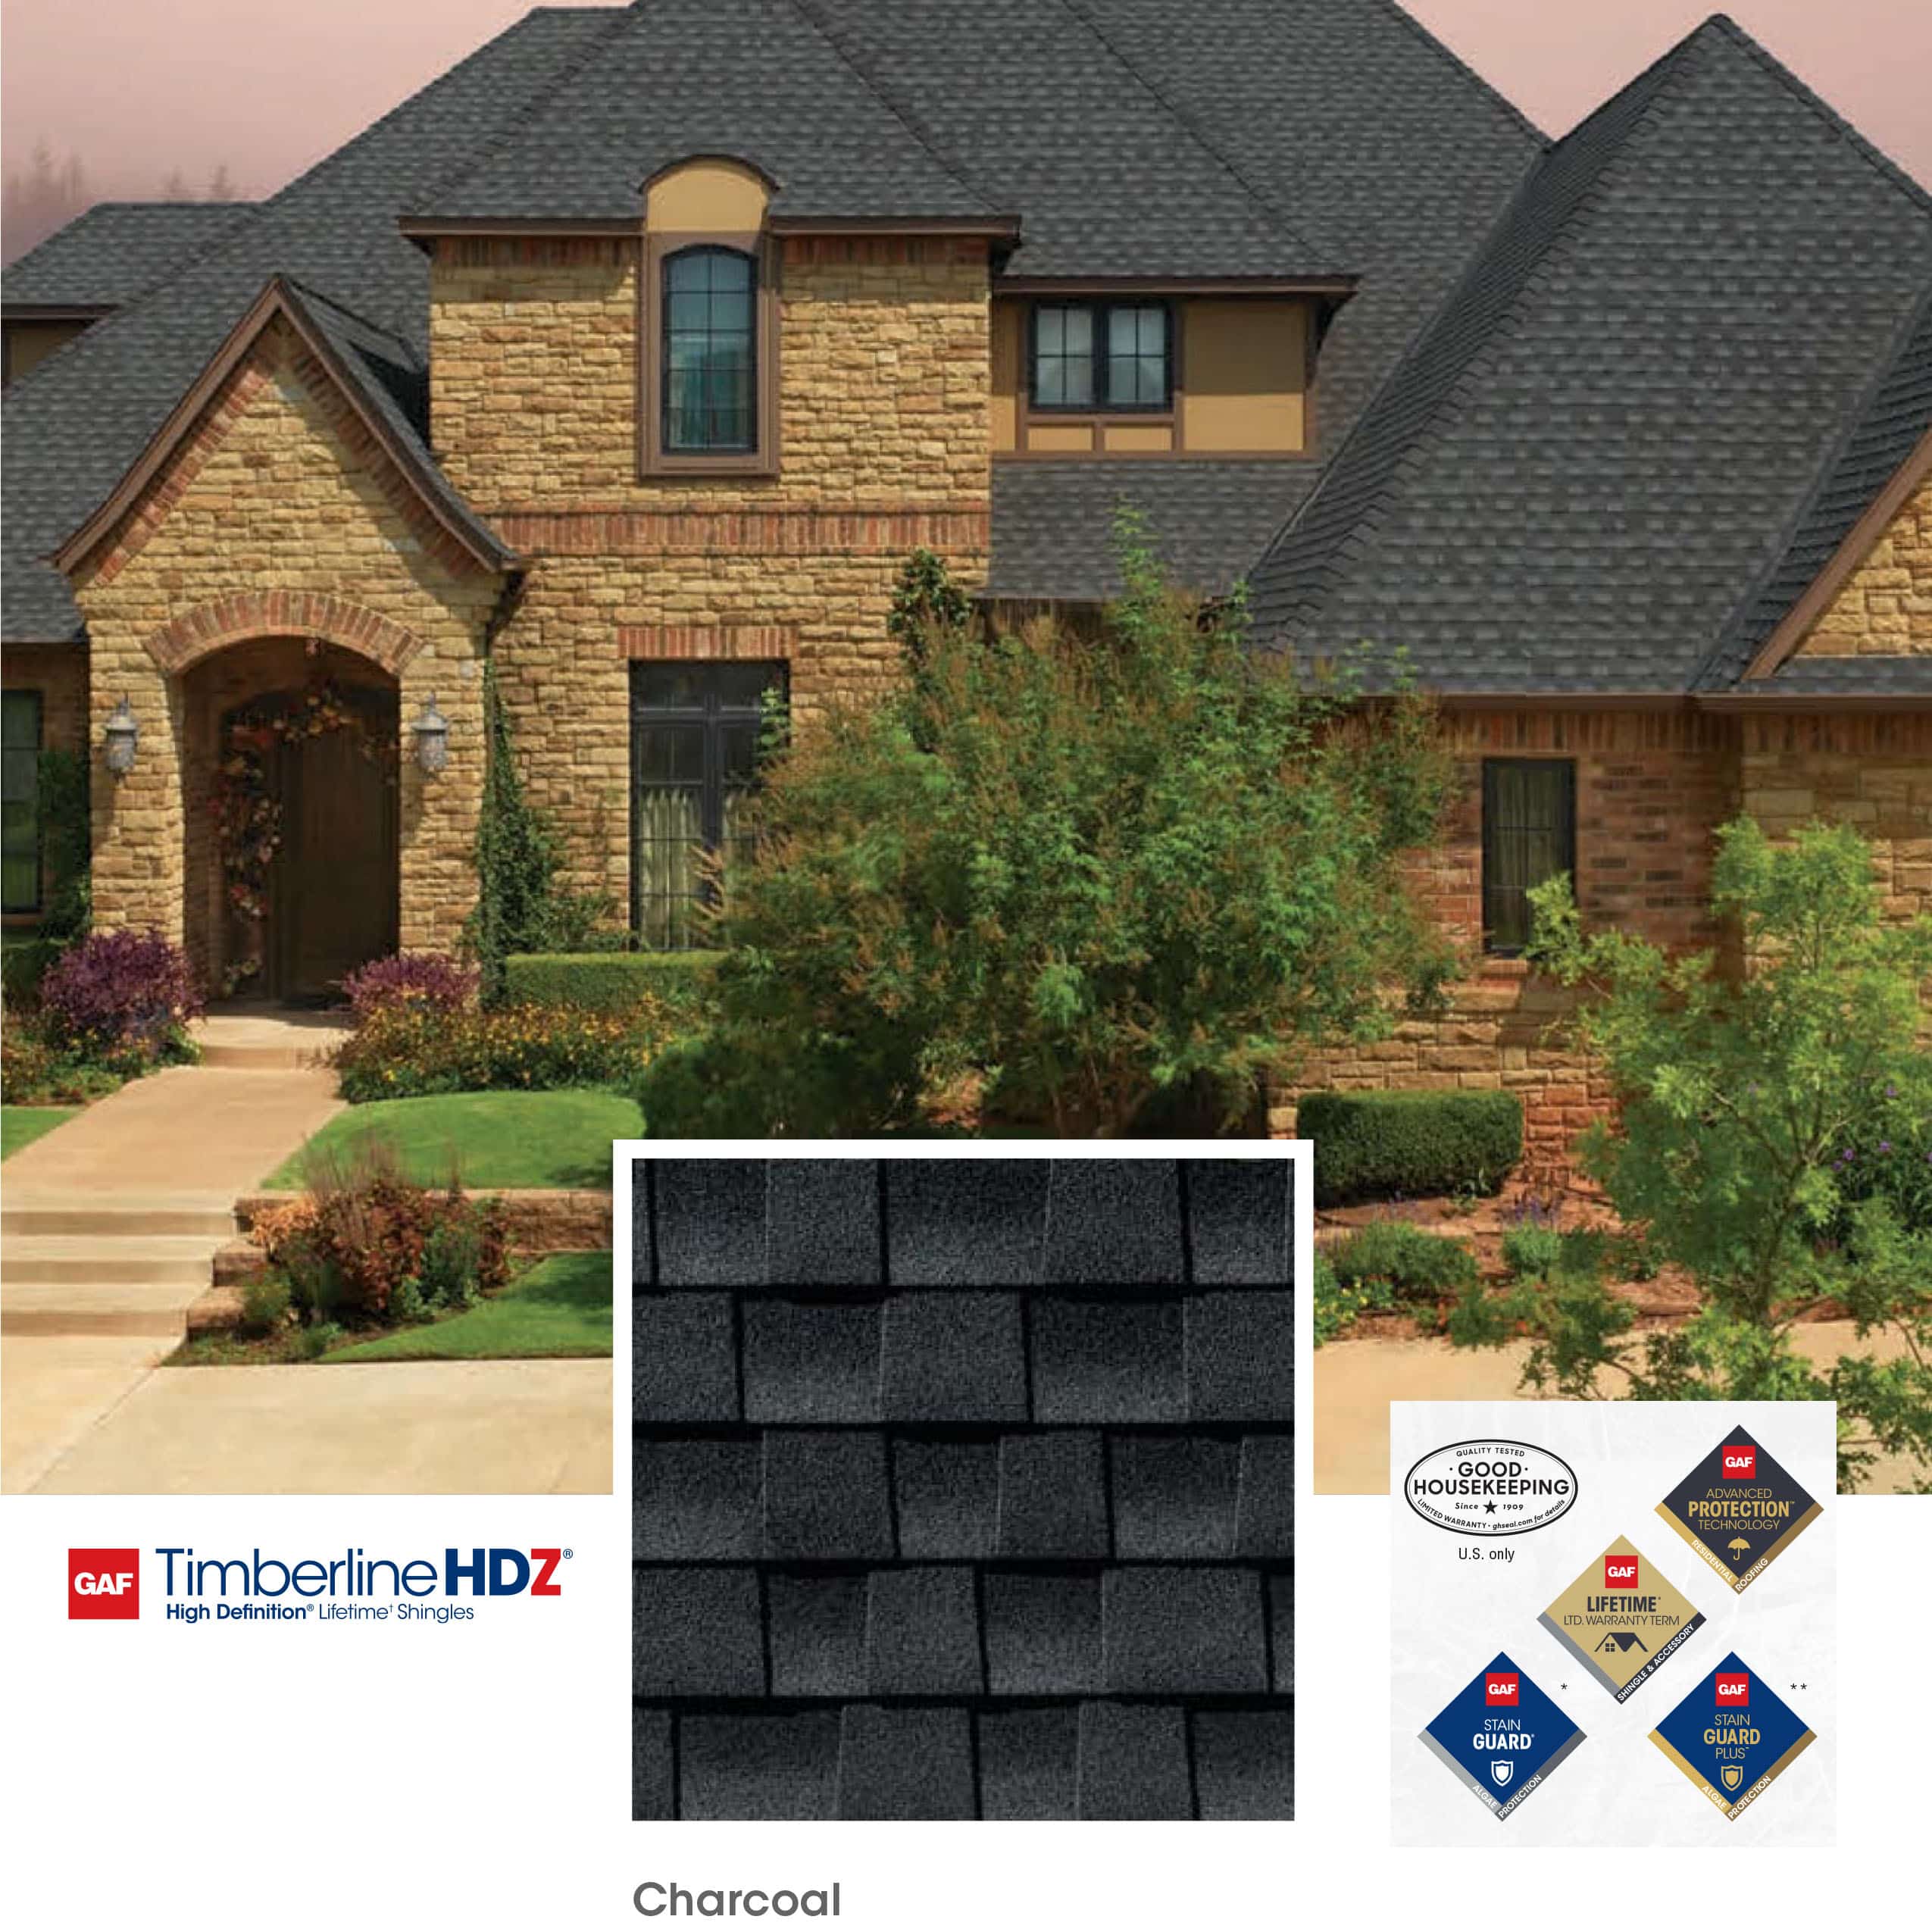 timberline Charcoal roof